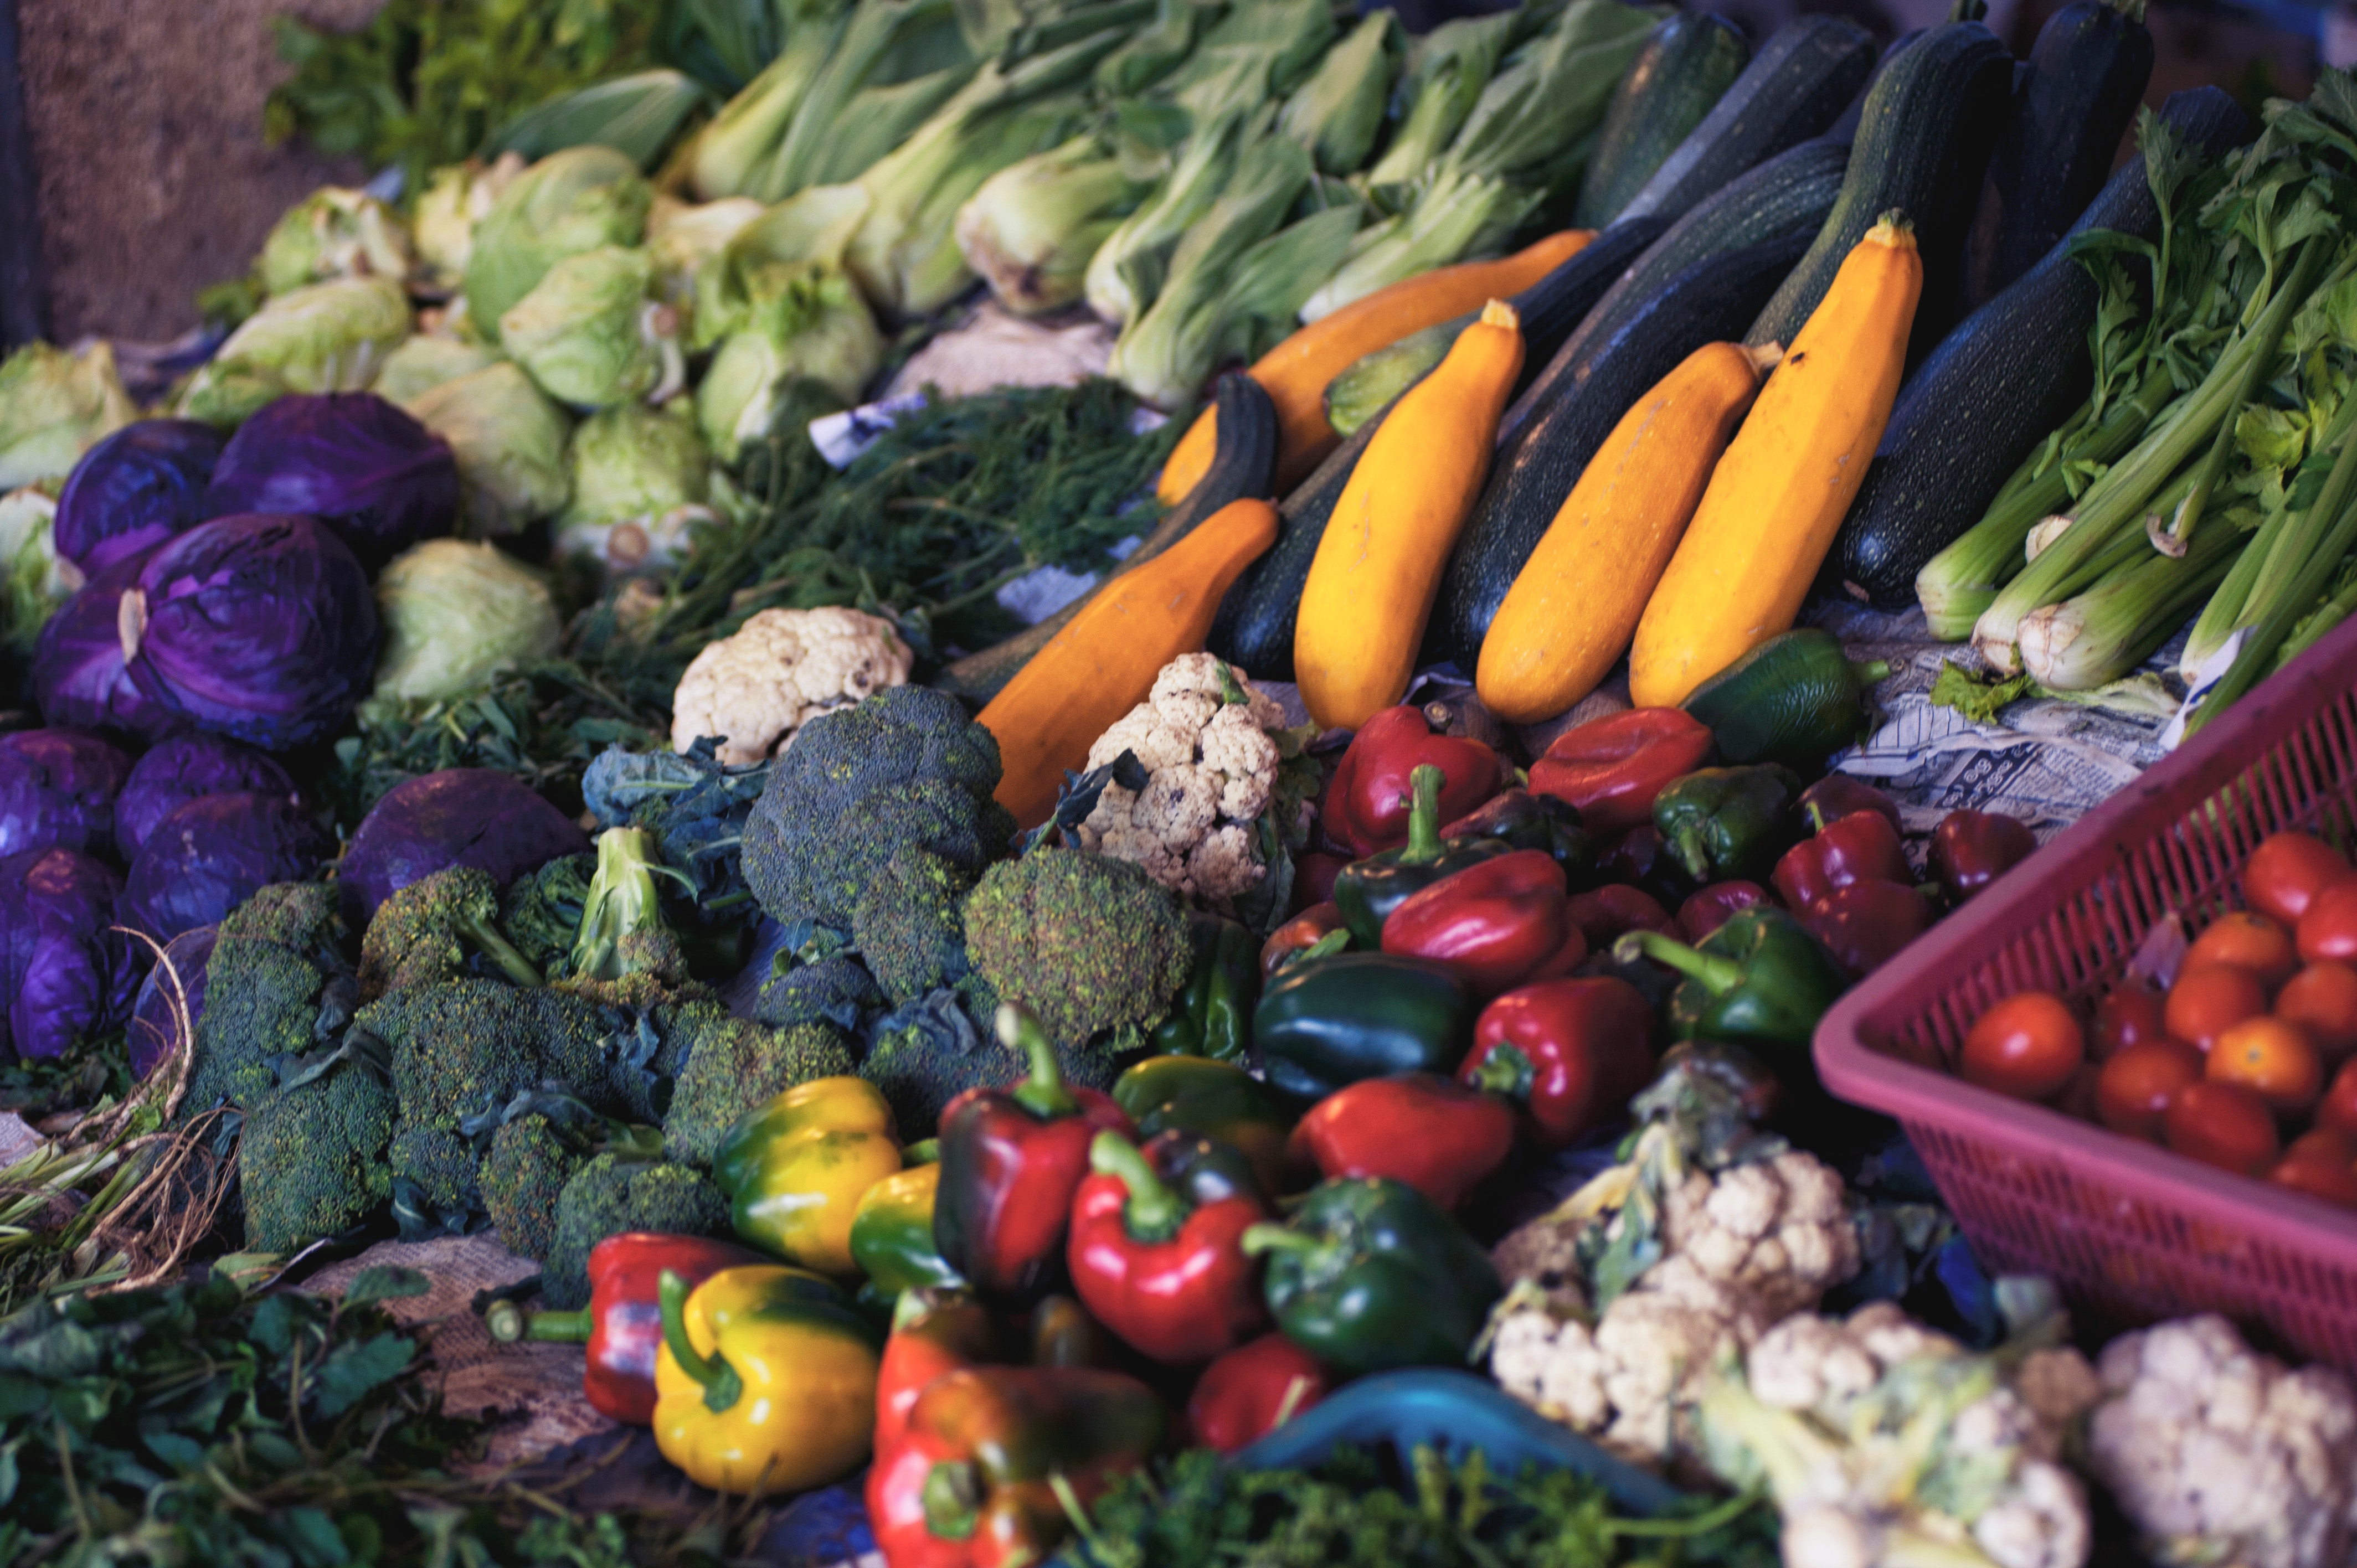 Various vegetables of many colors in a vegetable stand.